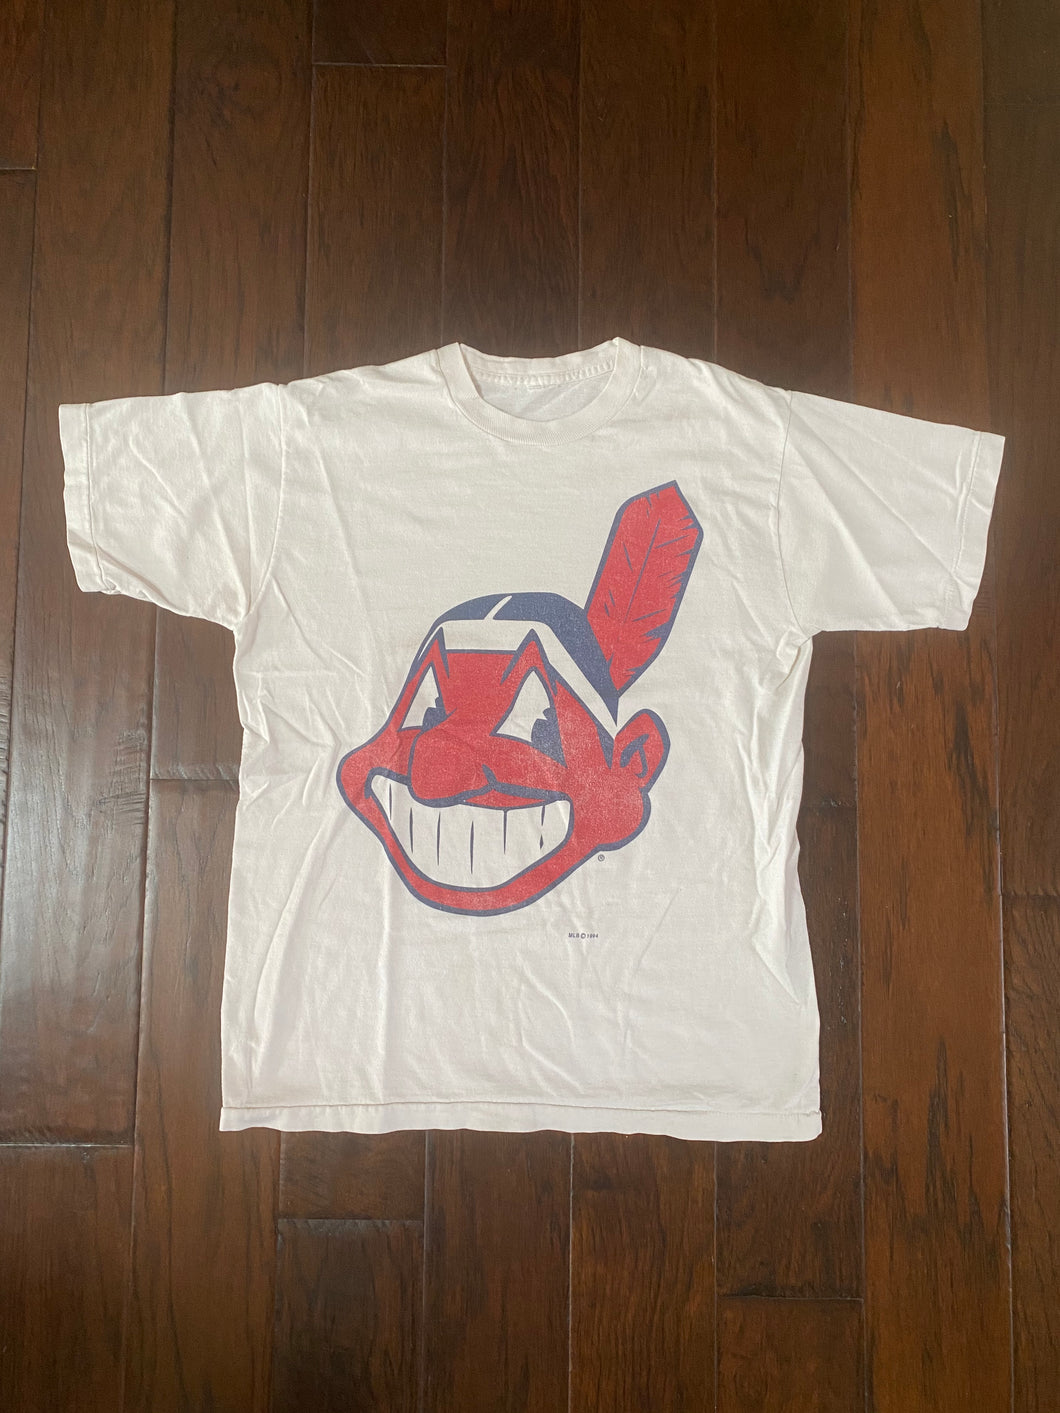 Cleveland Indians 1994 “Chief Wahoo” Vintage Distressed T-shirt